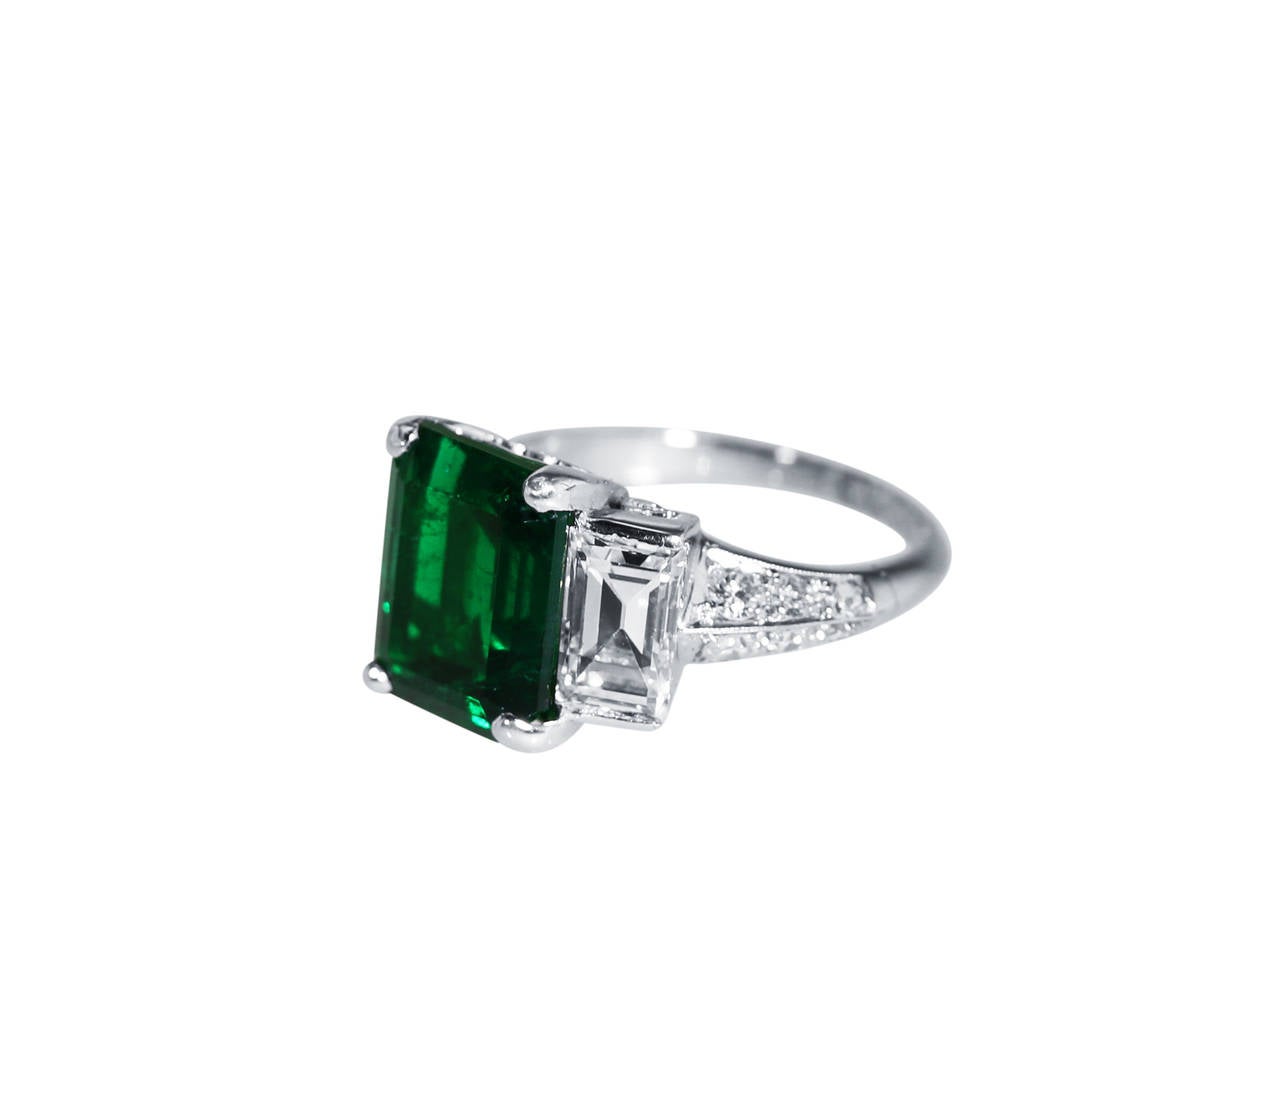 A platinum, emerald and diamond ring, set in the center with an emerald-cut emerald weighing 4.64 carats, flanked by 2 larger baguette diamonds weighing approximately 2.00 carats and  22 round diamonds weighing approximately 0.40 carat, size 6,